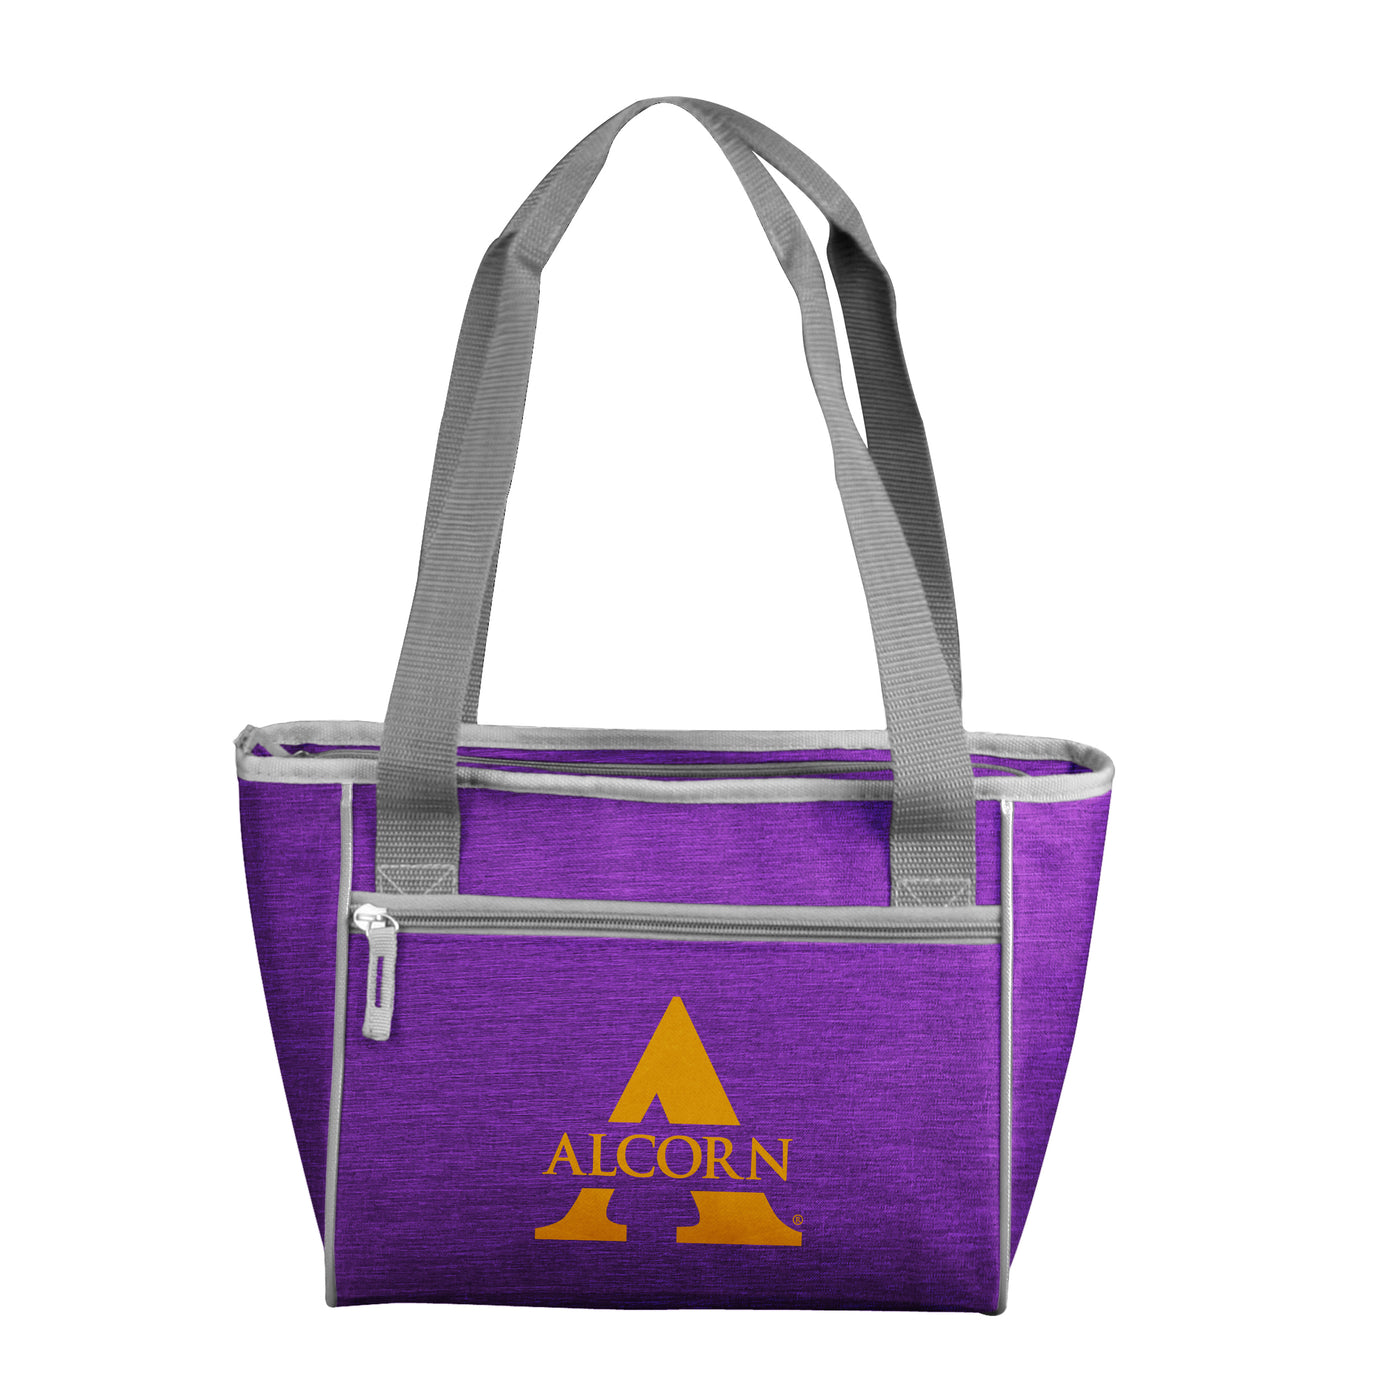 Alcorn State Crosshatch 16 Can Cooler Tote